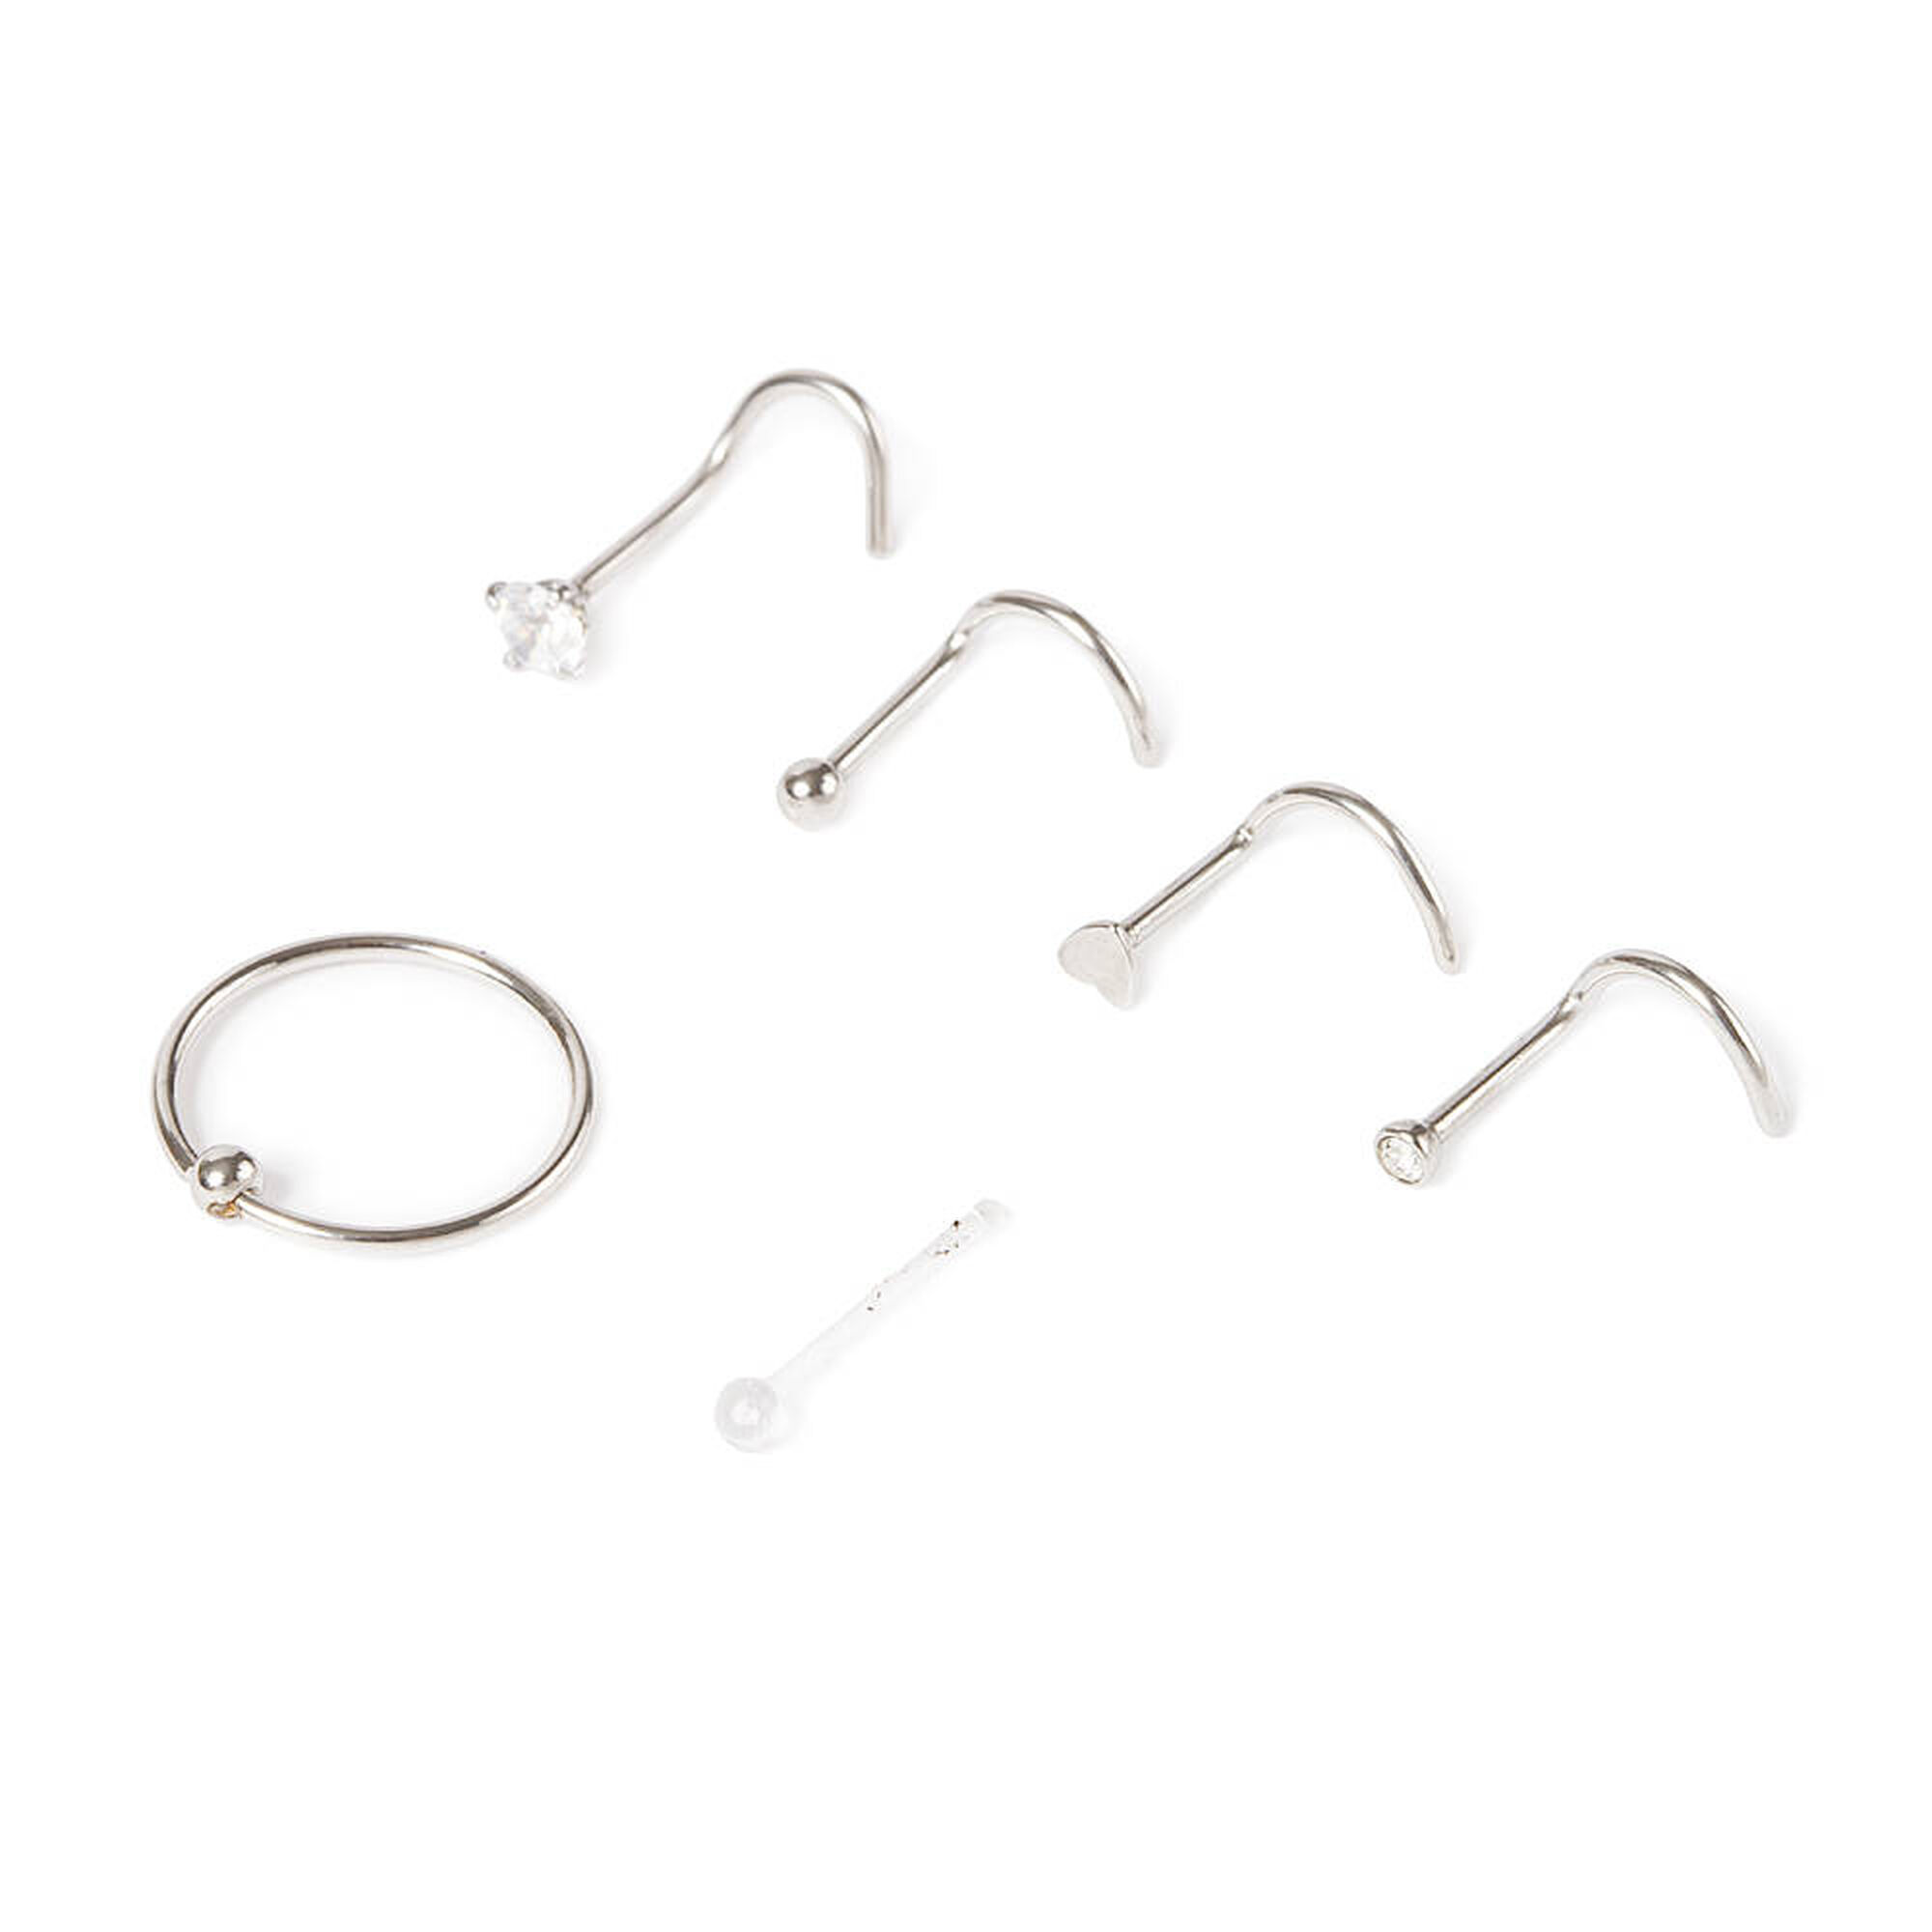 View Claires Tone 20G Ball Heart Hoop Nose Ring Studs 6 Pack Silver information